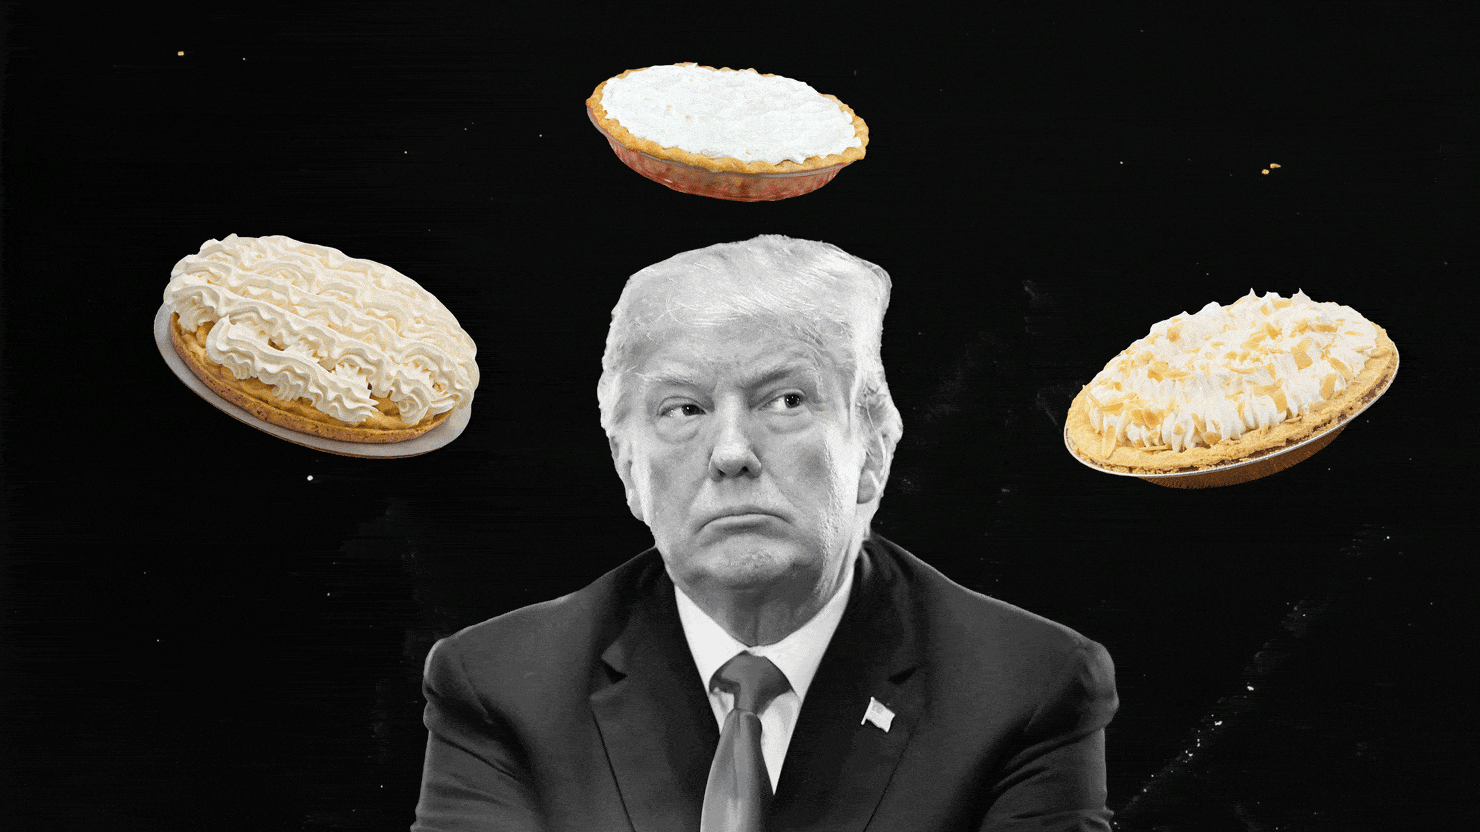 How Trump’s Fear of Getting Pied May Come Back to Cream Him